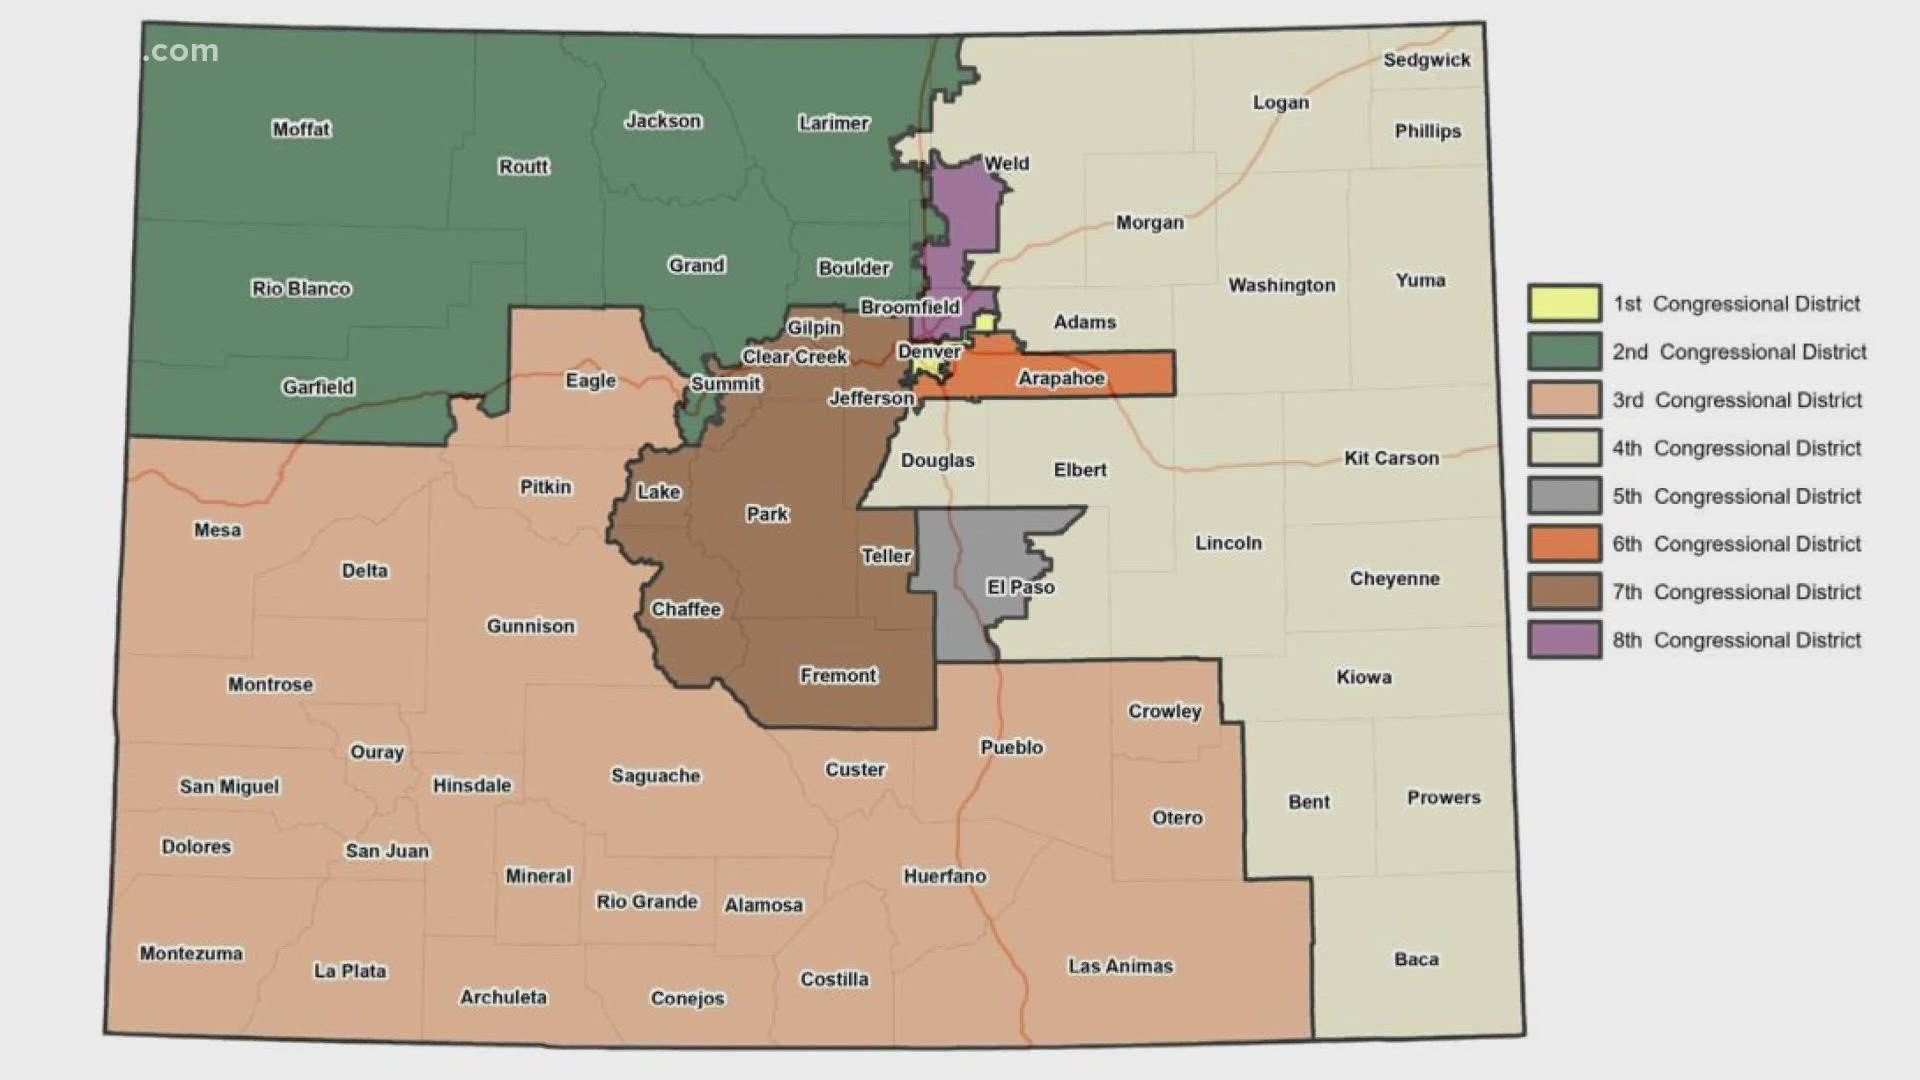 The changes to the 2nd and 3rd Congressional Districts could put Republican Rep. Lauren Boebert in a race against Democratic Rep. Joe Neguse.